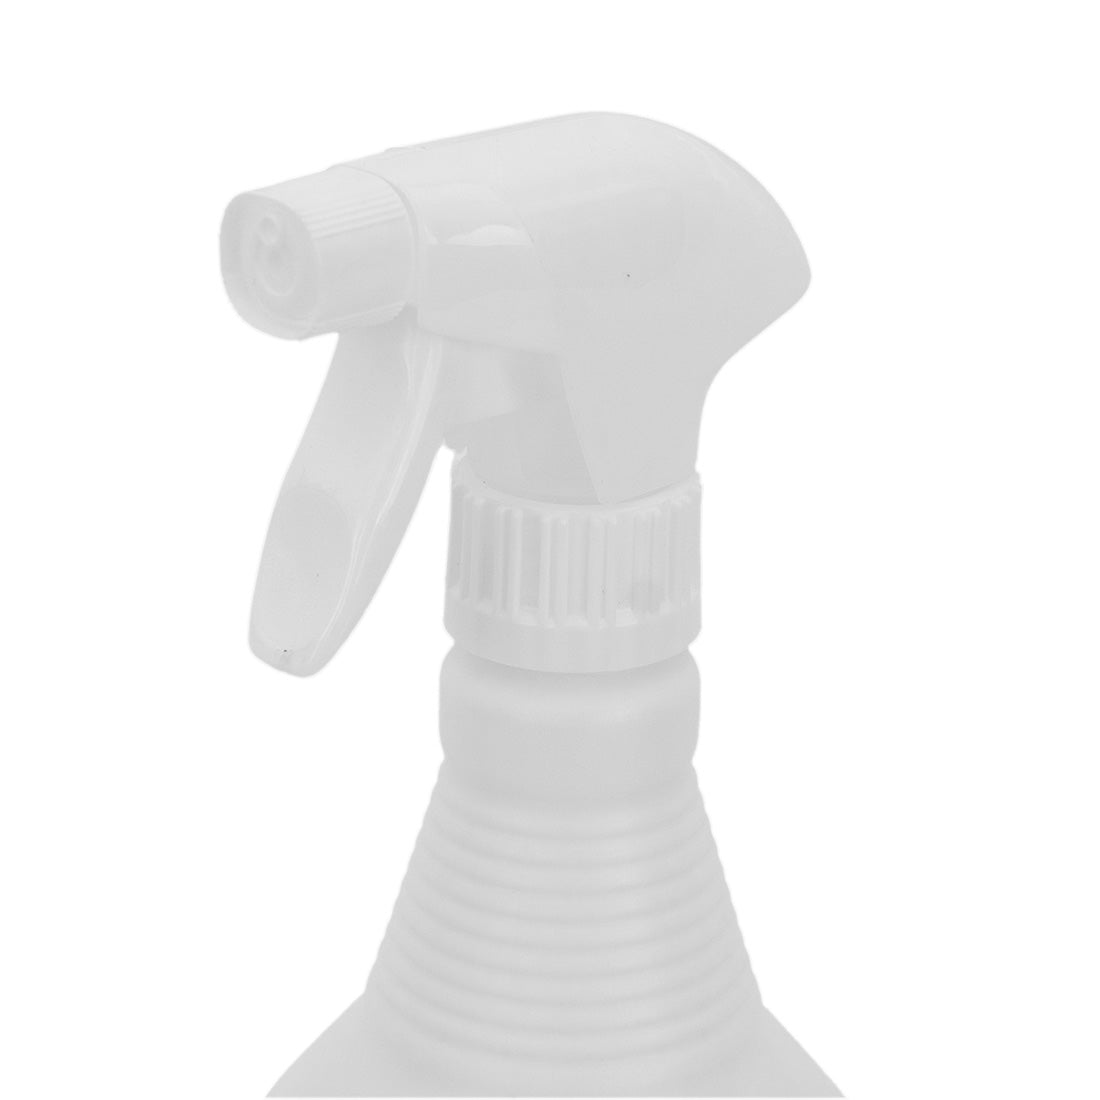 Clean-X Lime Scale Remover - 32 oz Nozzle View